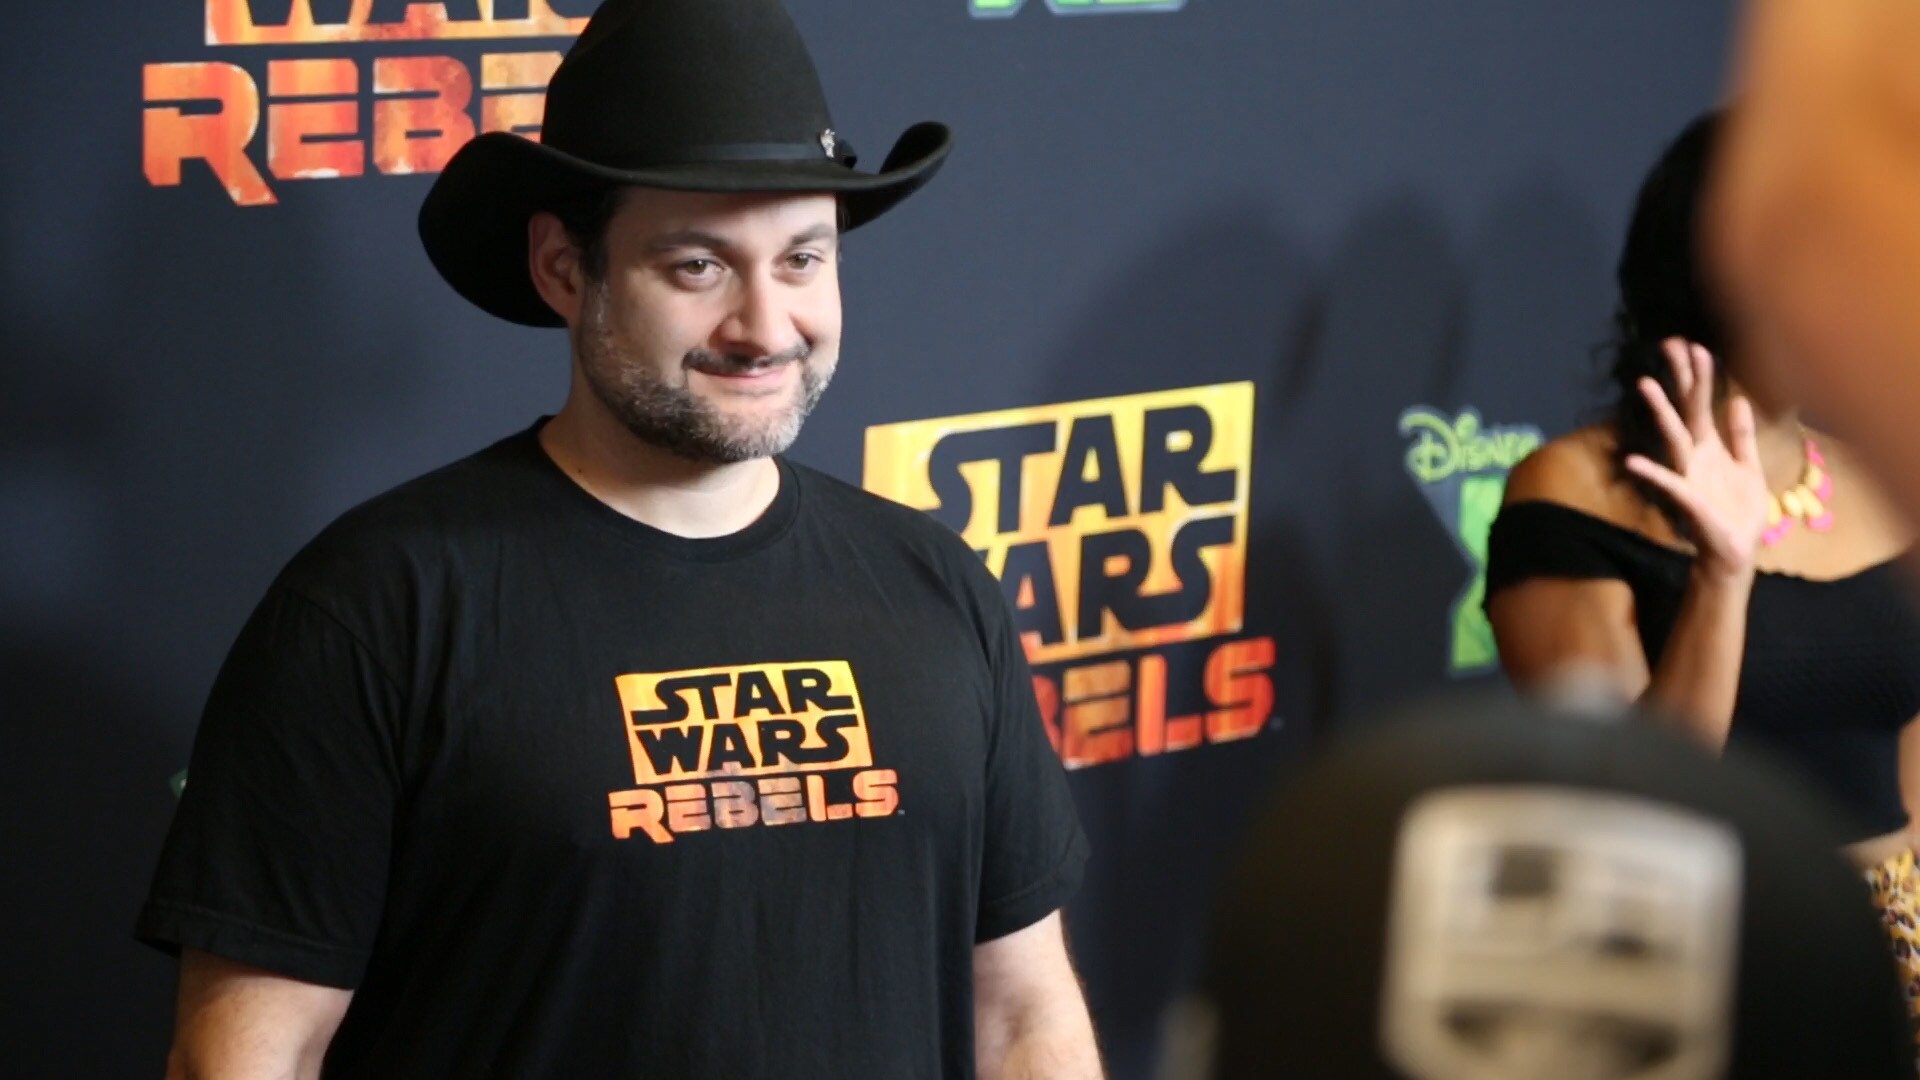 Video on Star Wars' Dave Filoni and his role in designing the Star